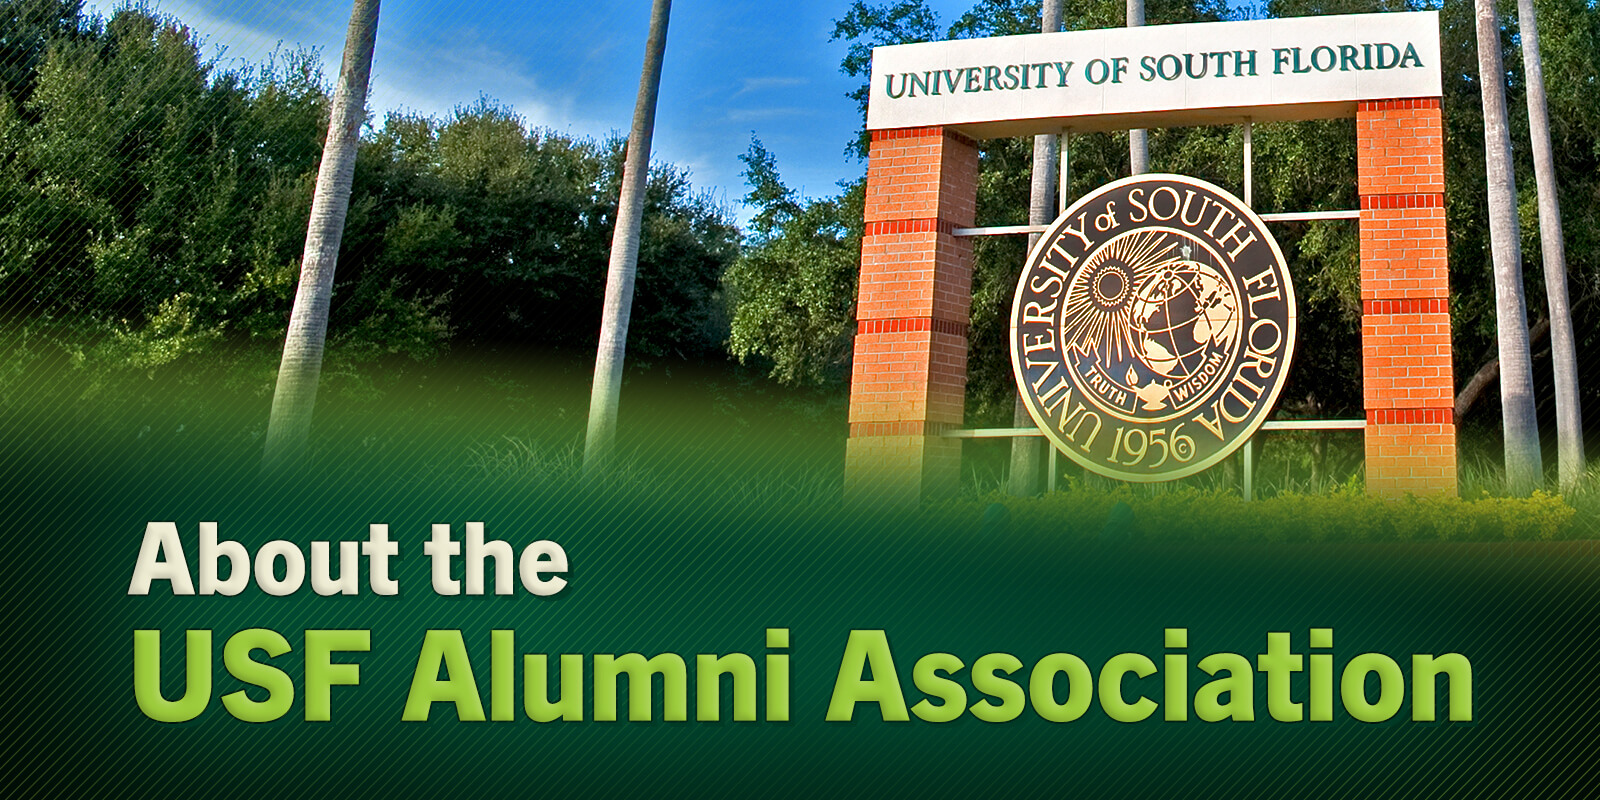 About the USF Alumni Association